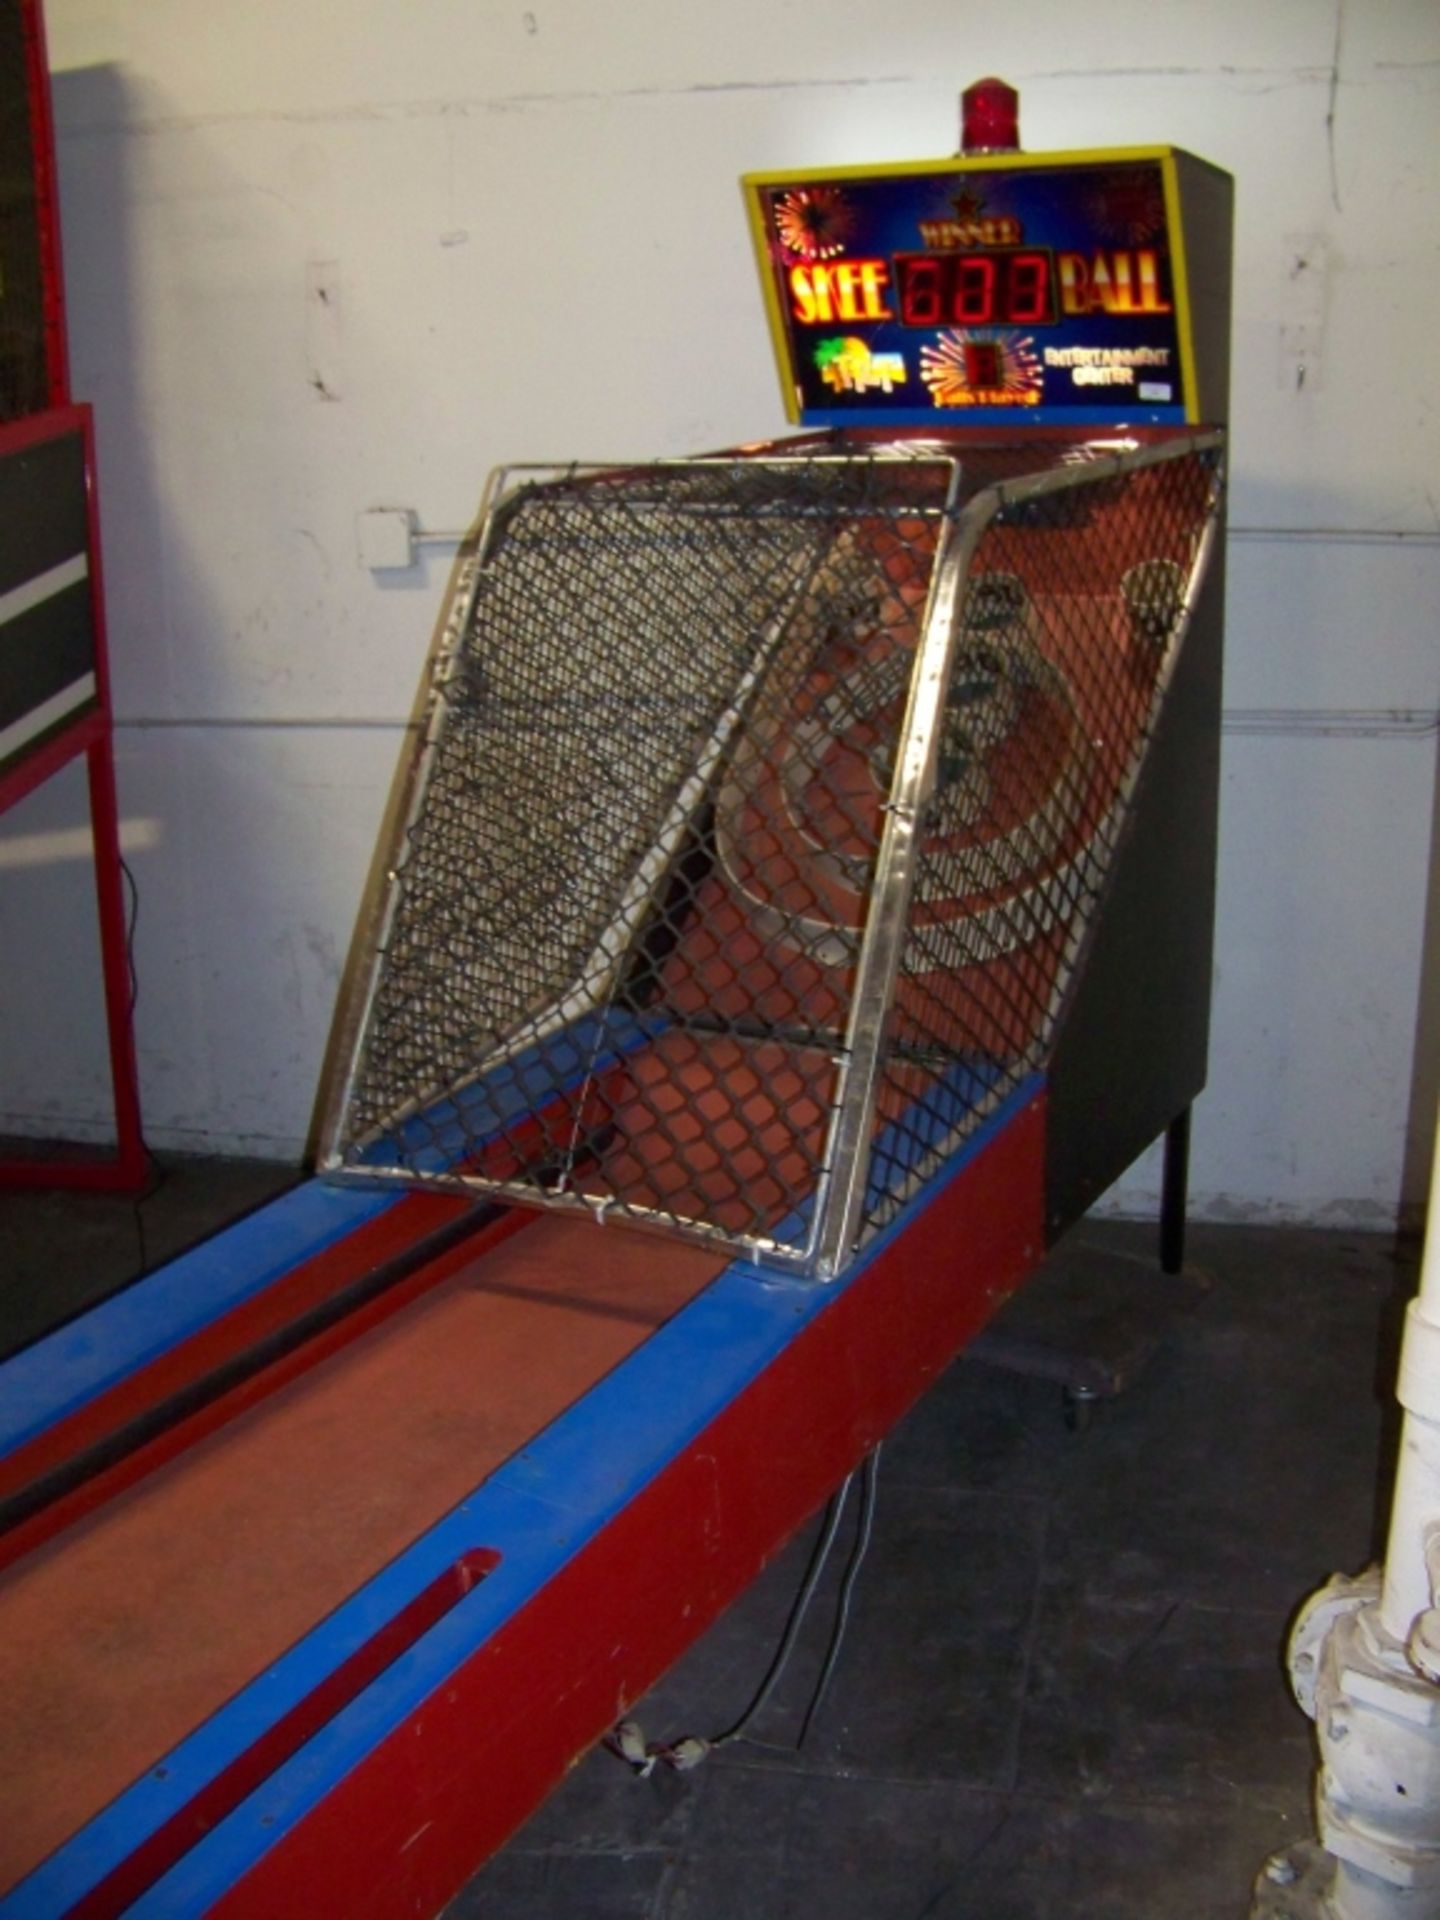 SKEEBALL ALLEY ROLLER MACHINE 13' LANE COMPLETE Item is in used condition. Evidence of wear and - Image 5 of 5